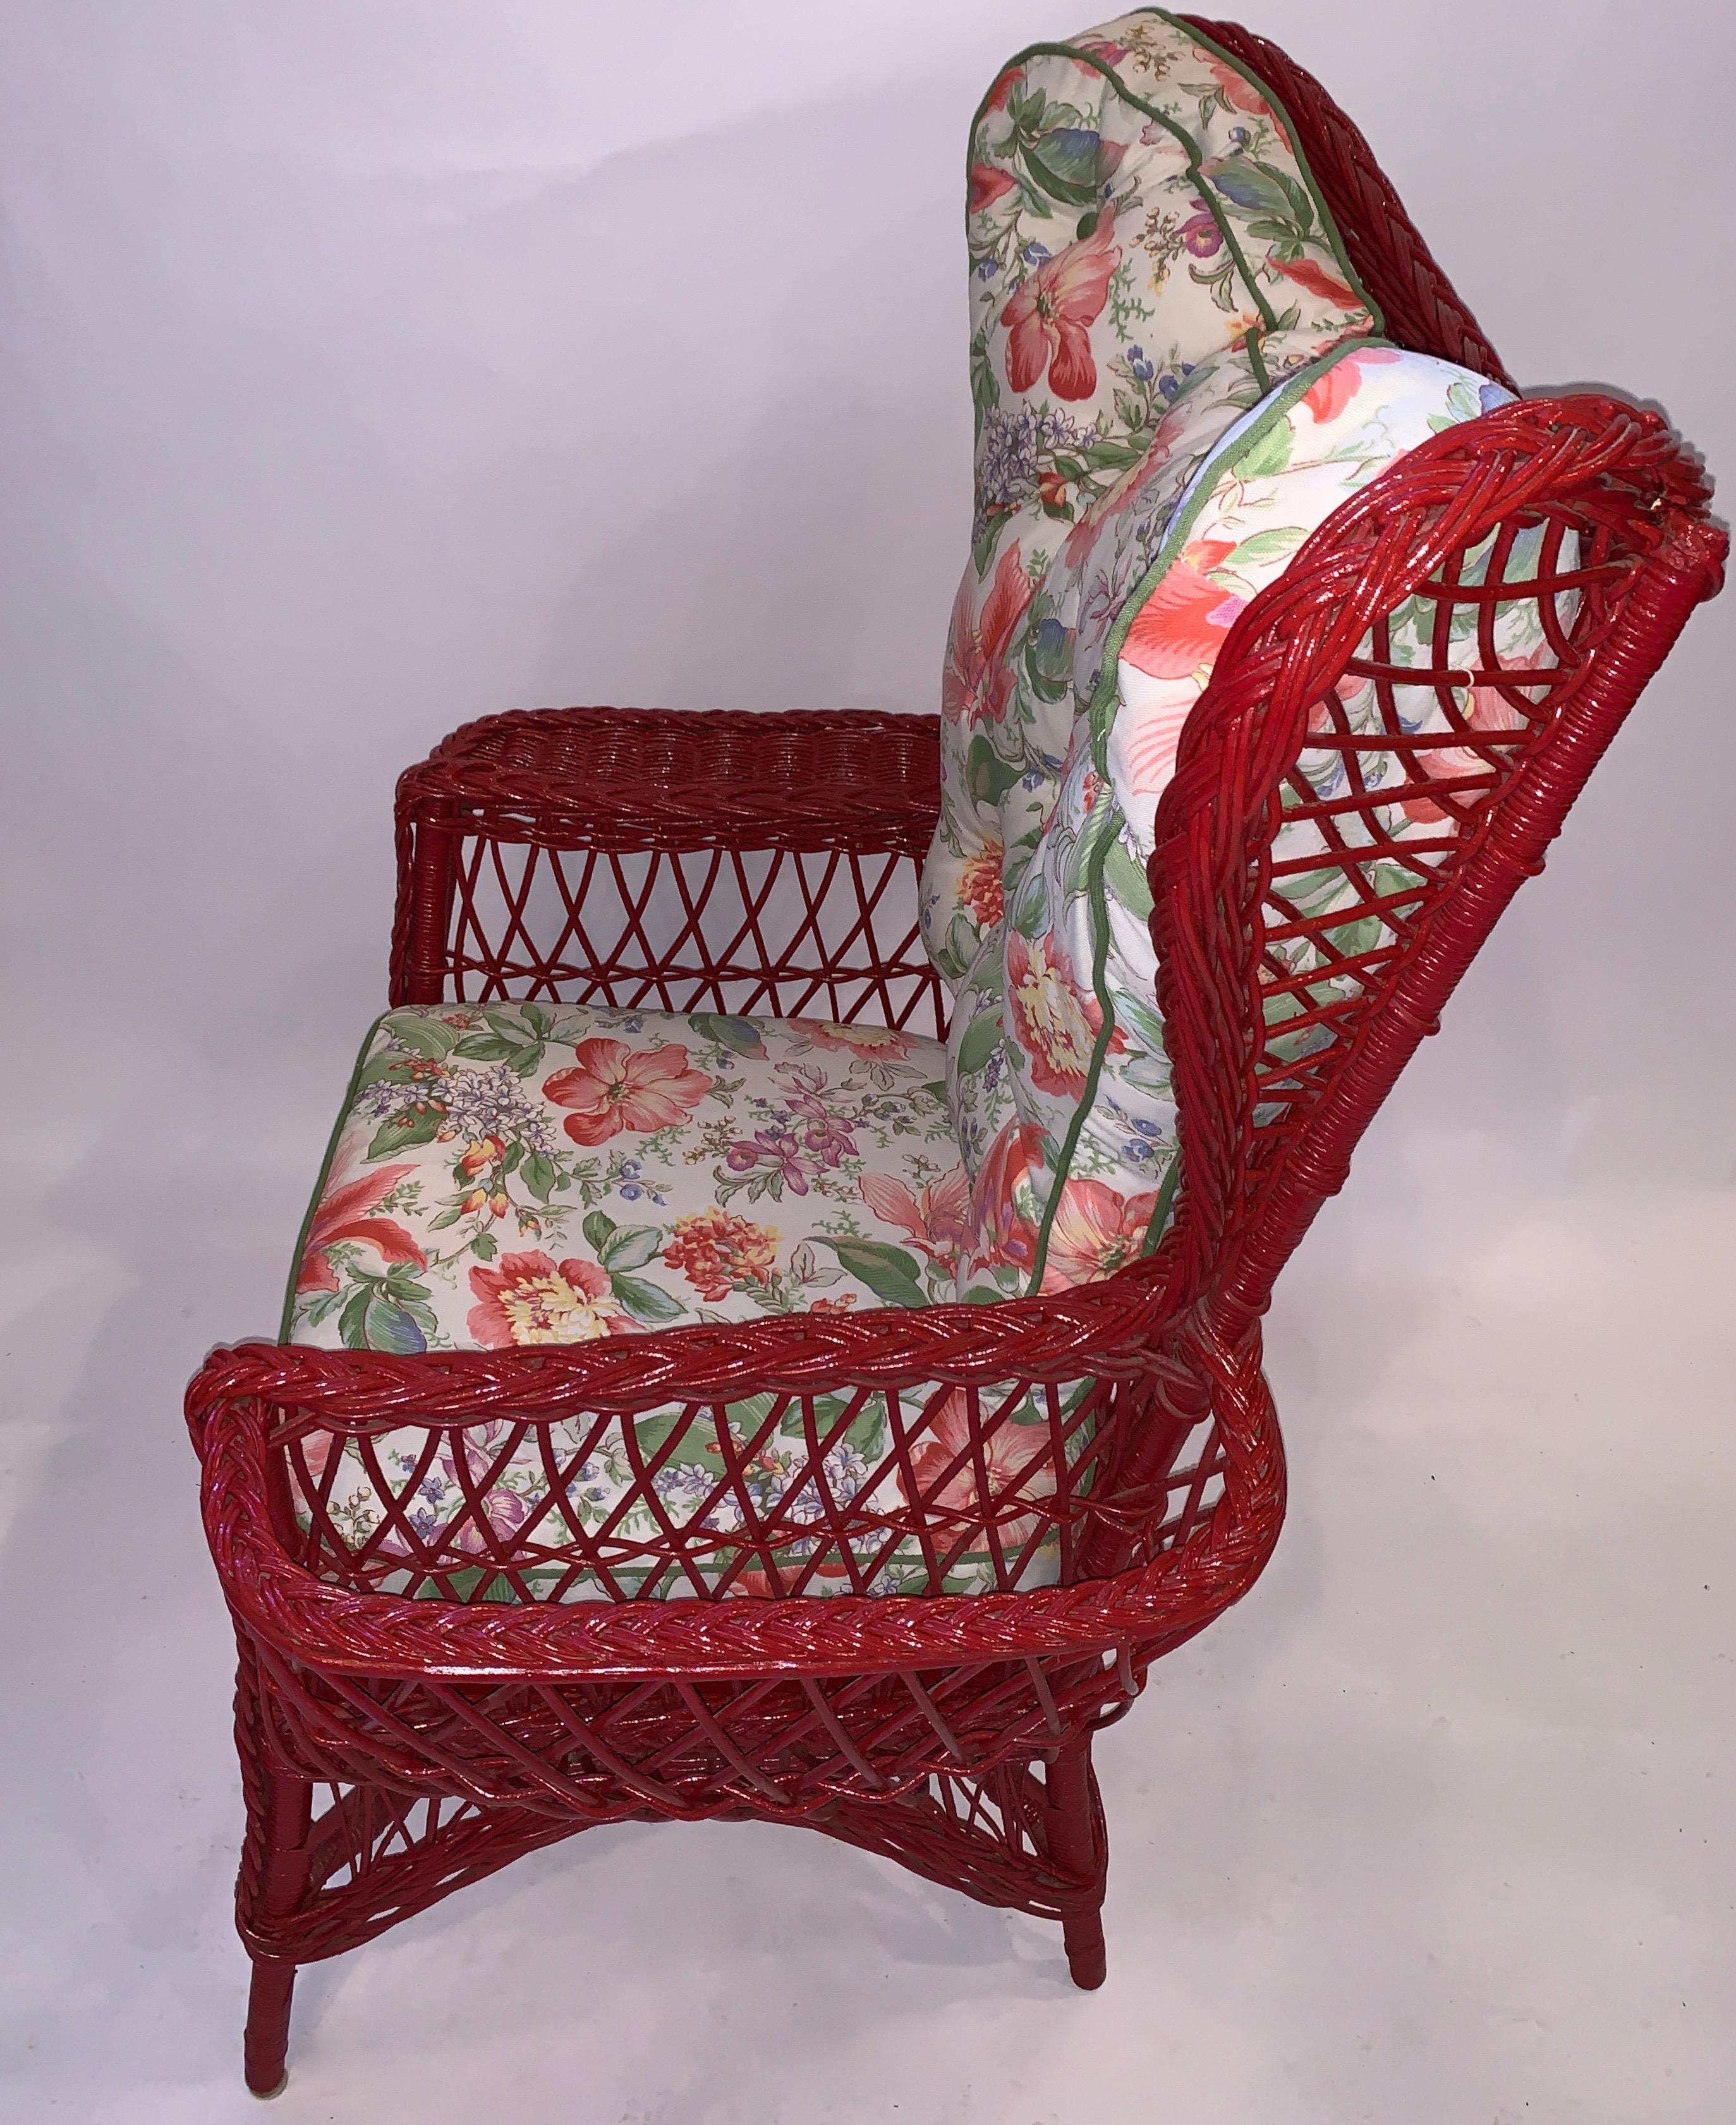 An exceptional oversized Bar Harbor style wing chair, C. 1900, American with oversized exaggerated curved wings, a wide arm and magazine pocket. It is hand woven with all new cushioning and contemporary upholstering.This is one of four complimentary